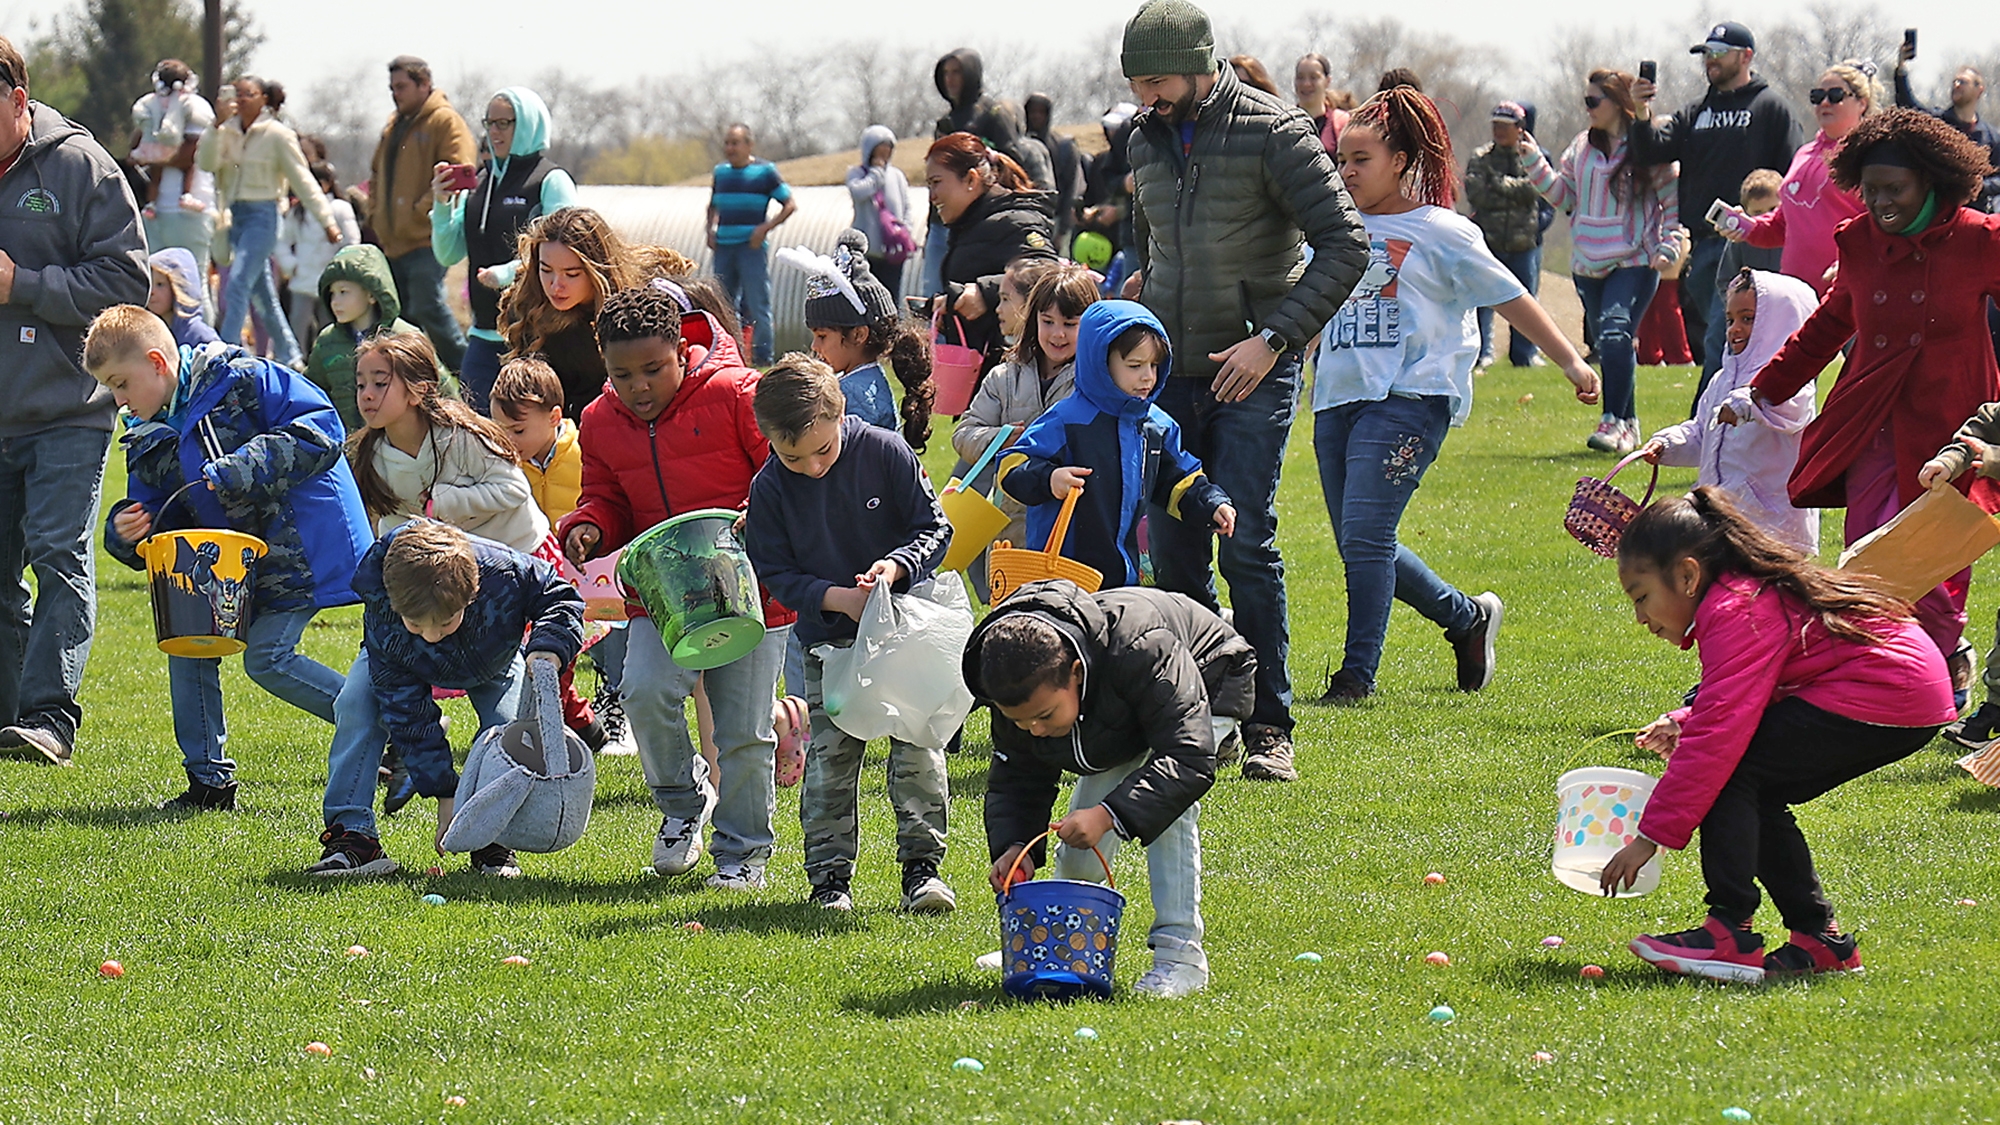 Easter Eggs: Where to find a hunt, Easter Bunny, other activities in the Dayton region in 2023